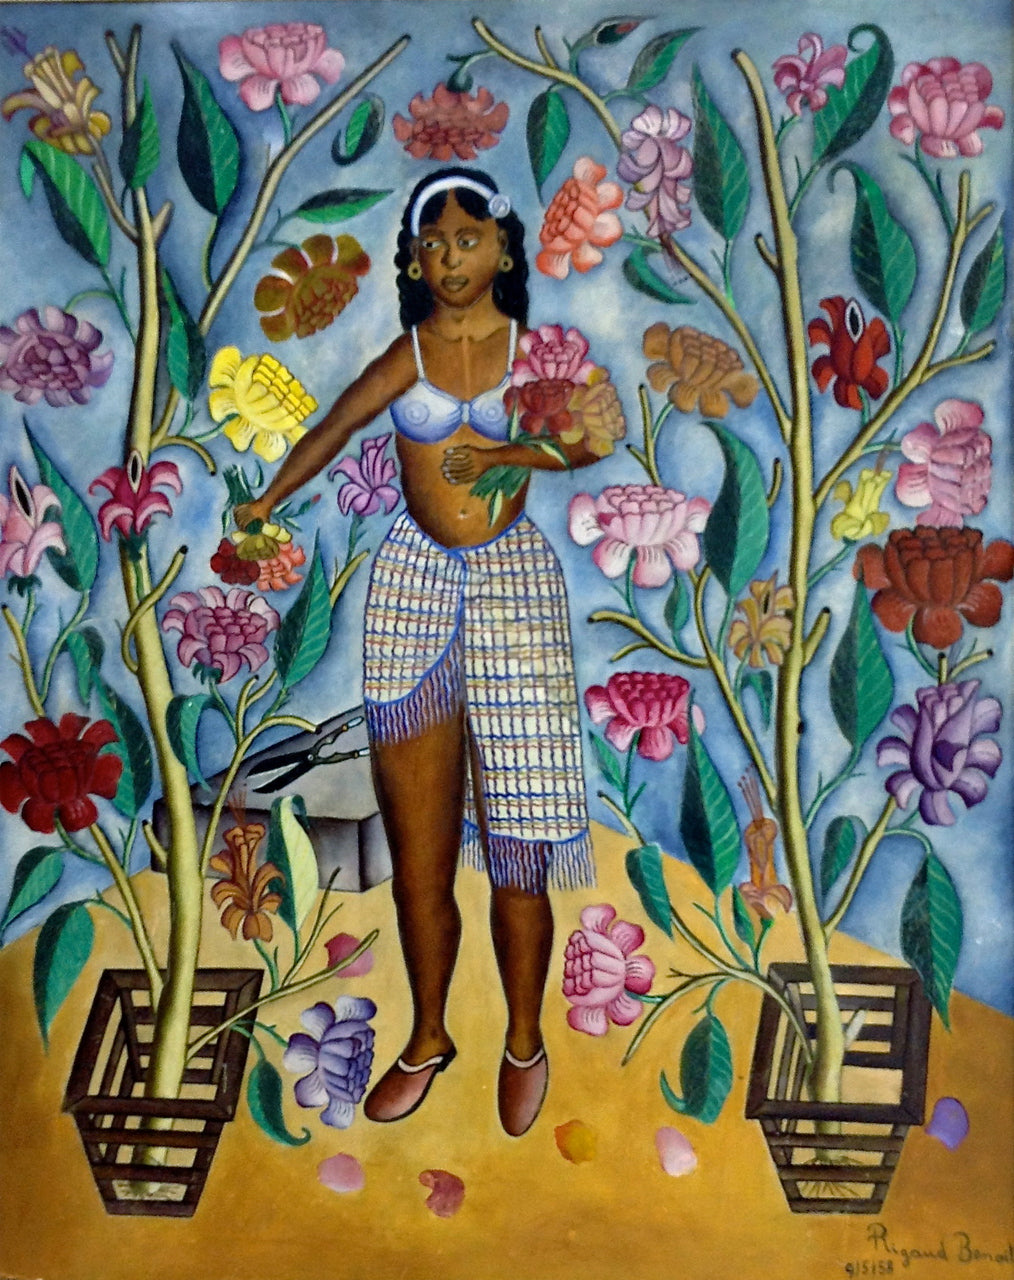 Rigaud Benoit (1911-1986) 30"x24" Femme Fleur/Flower Woman 1958 Oil on Board Painting #5-3-96GSN-Fondation Marie & Georges S. Nader